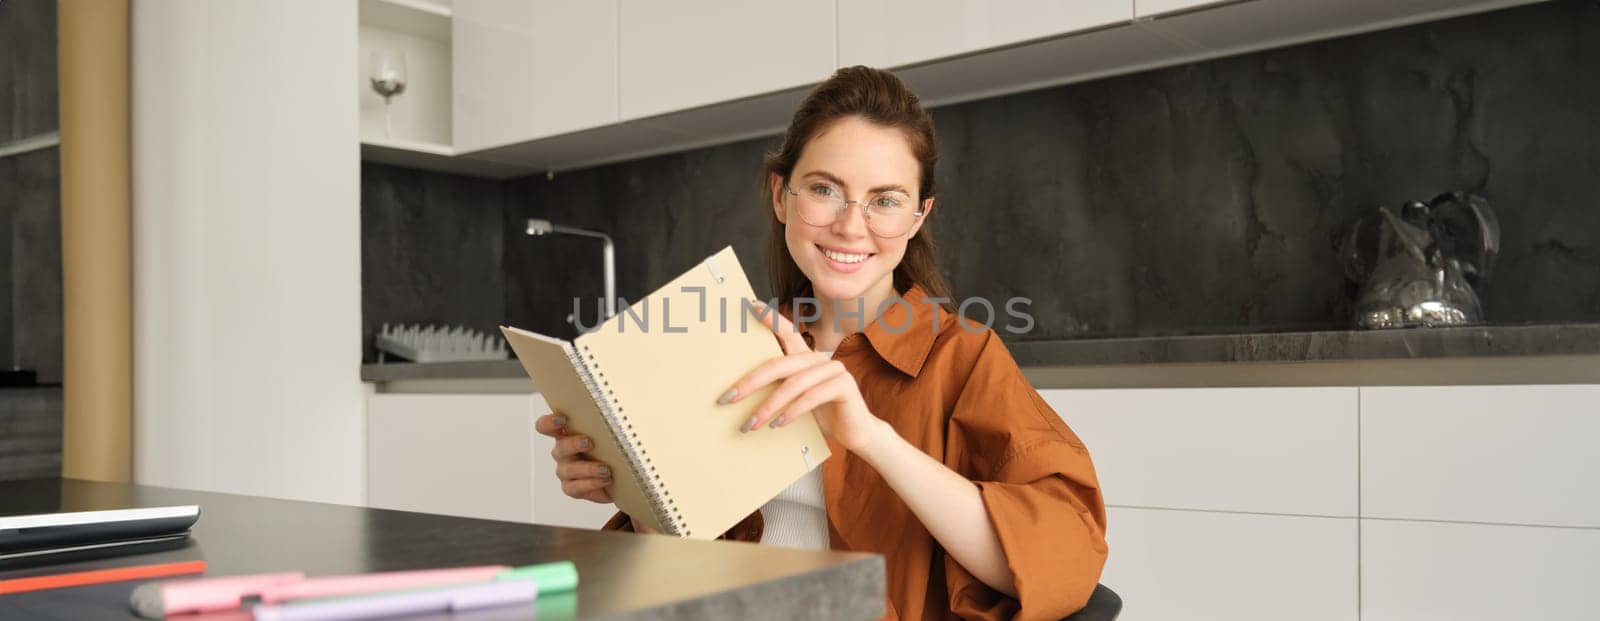 Close up portrait of young woman, student in kitchen, holding notebook, revising for exam at home, studying, reading her planner.